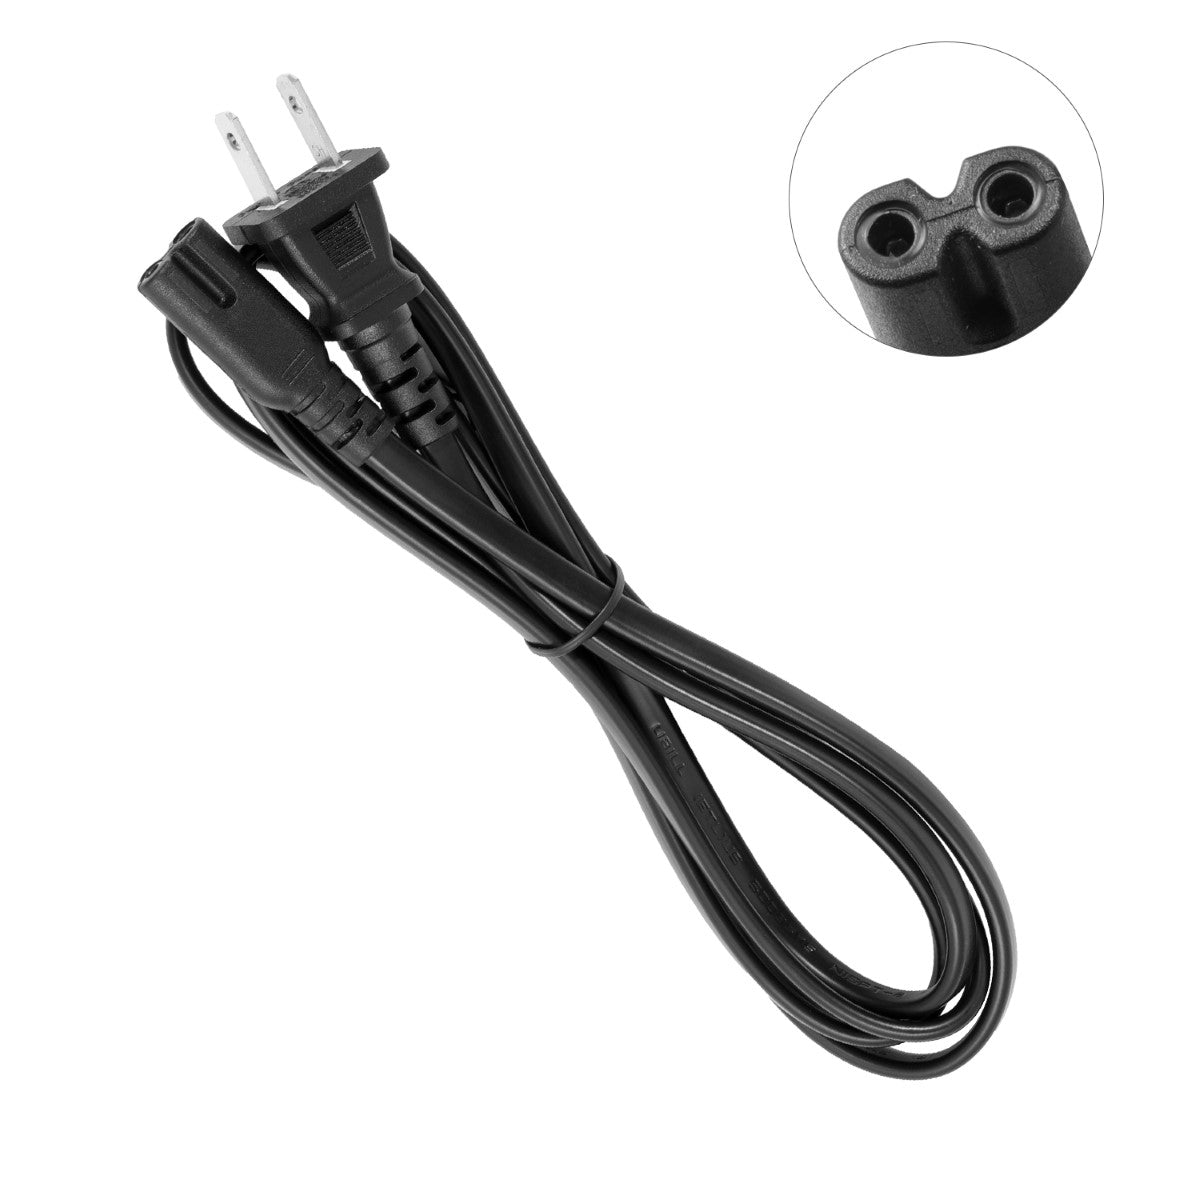 Power Cord for HP Officejet Pro X451 CN459A Printer.